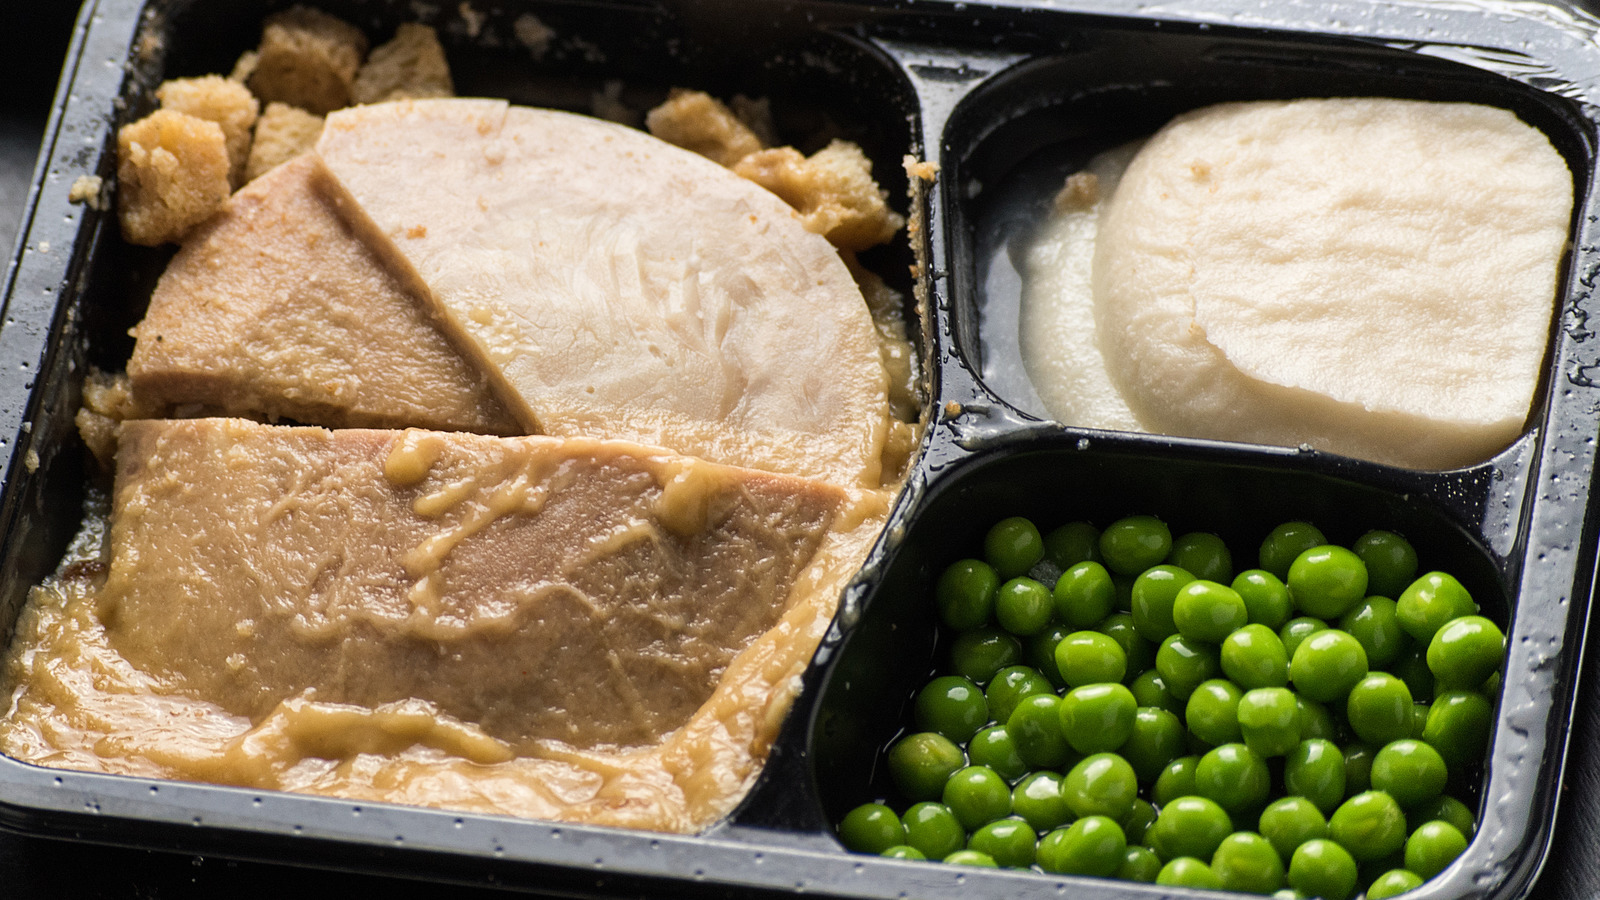 This Is The Worst Frozen Dinner You Can Buy